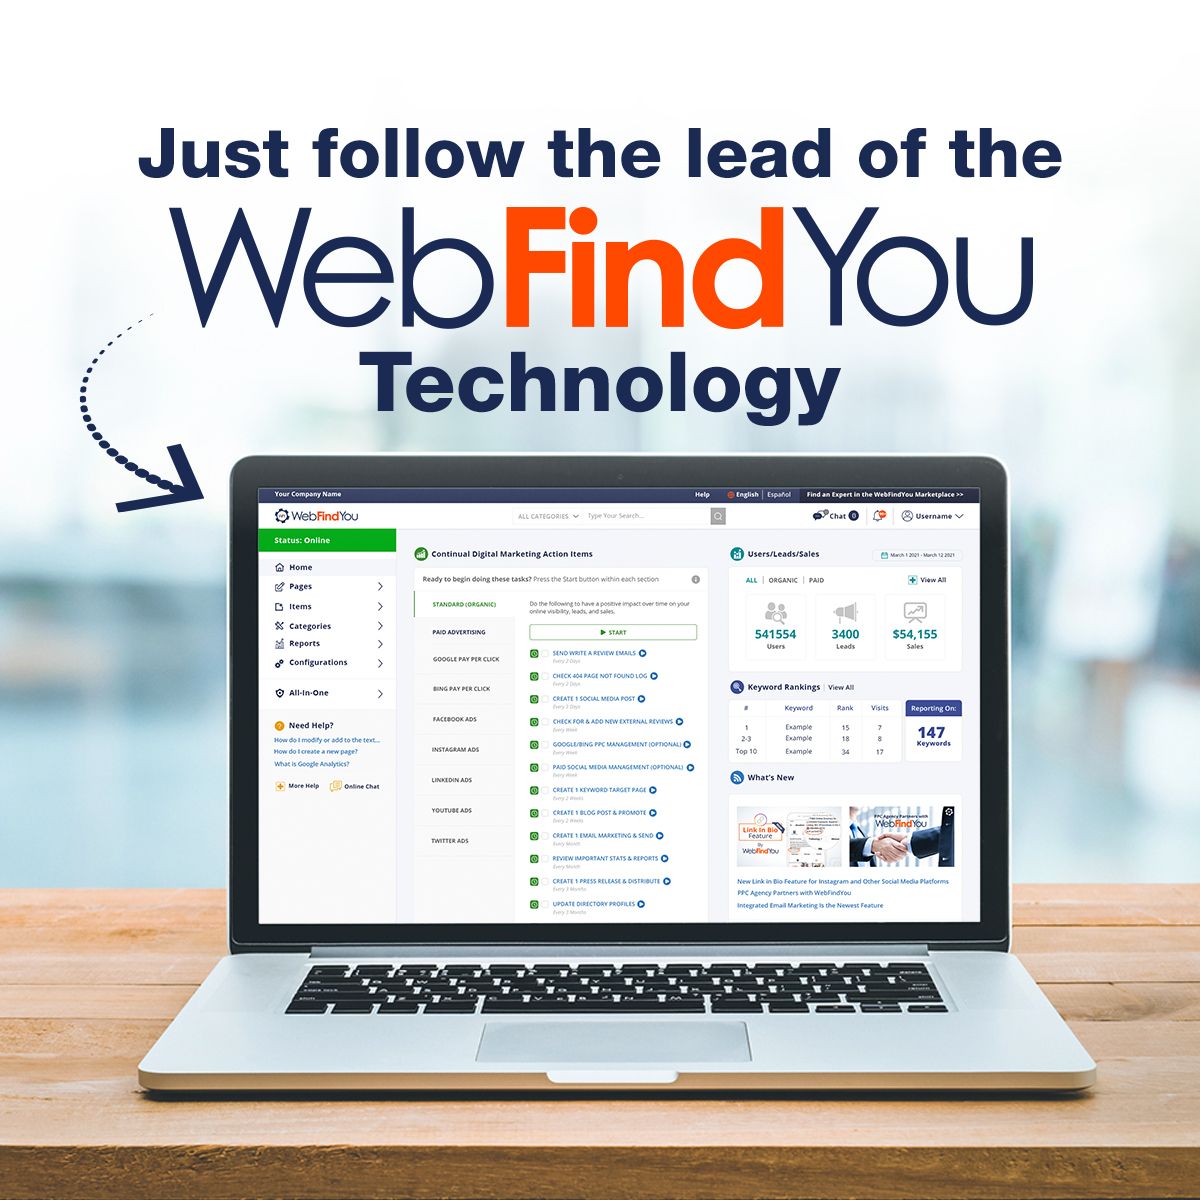 Just follow the lead of the WebFindYou Technology